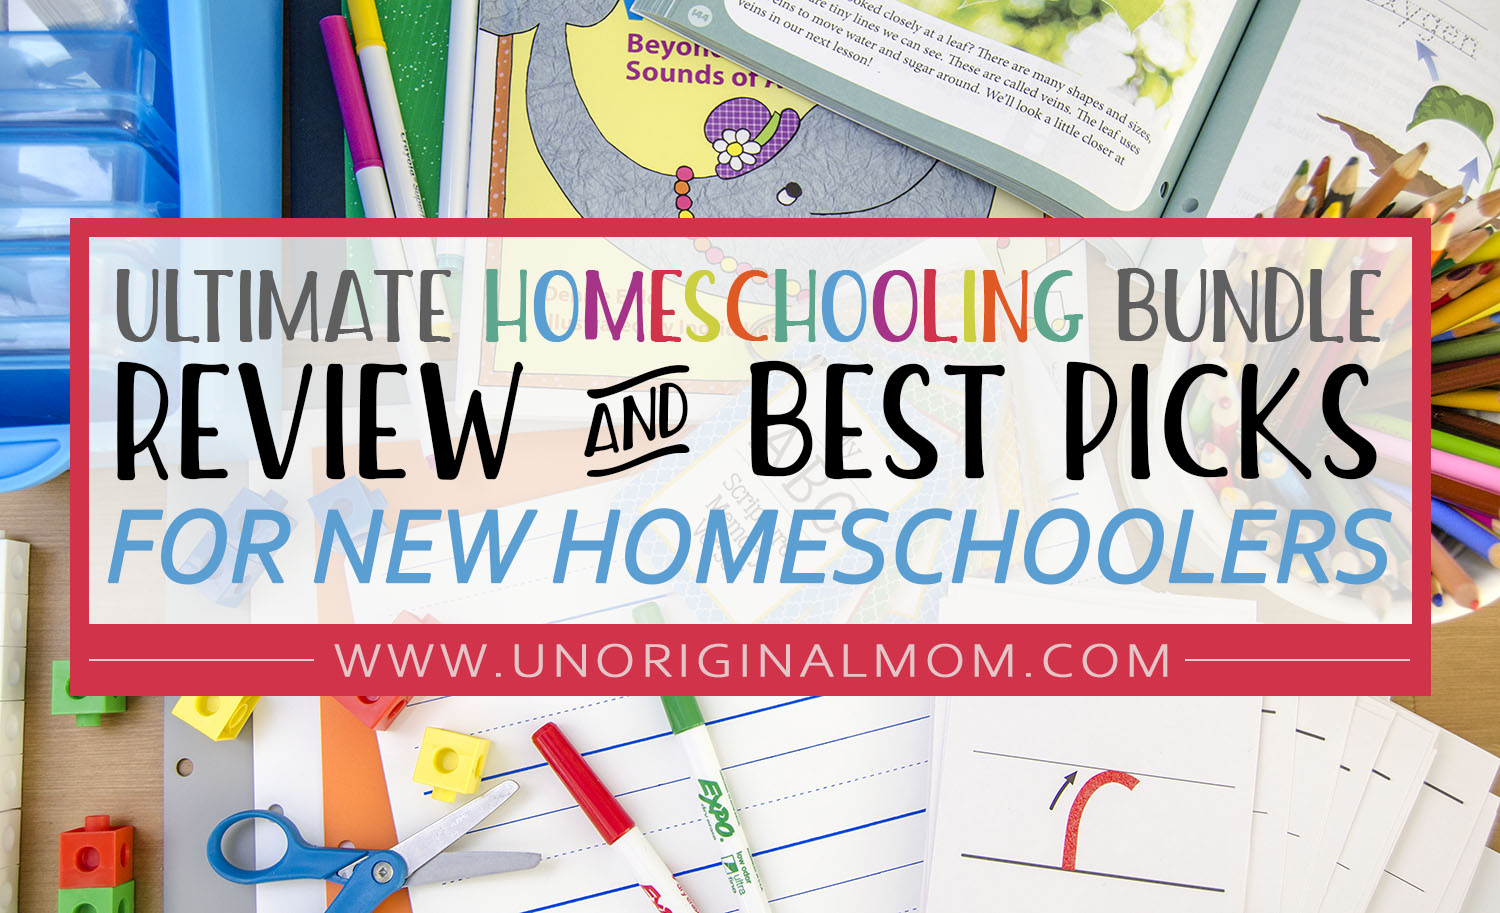 Looking for resources for temporary homeschooling? Here's my review of the Ultimate Homeschooling Bundle and my best picks for homeschooling beginners.